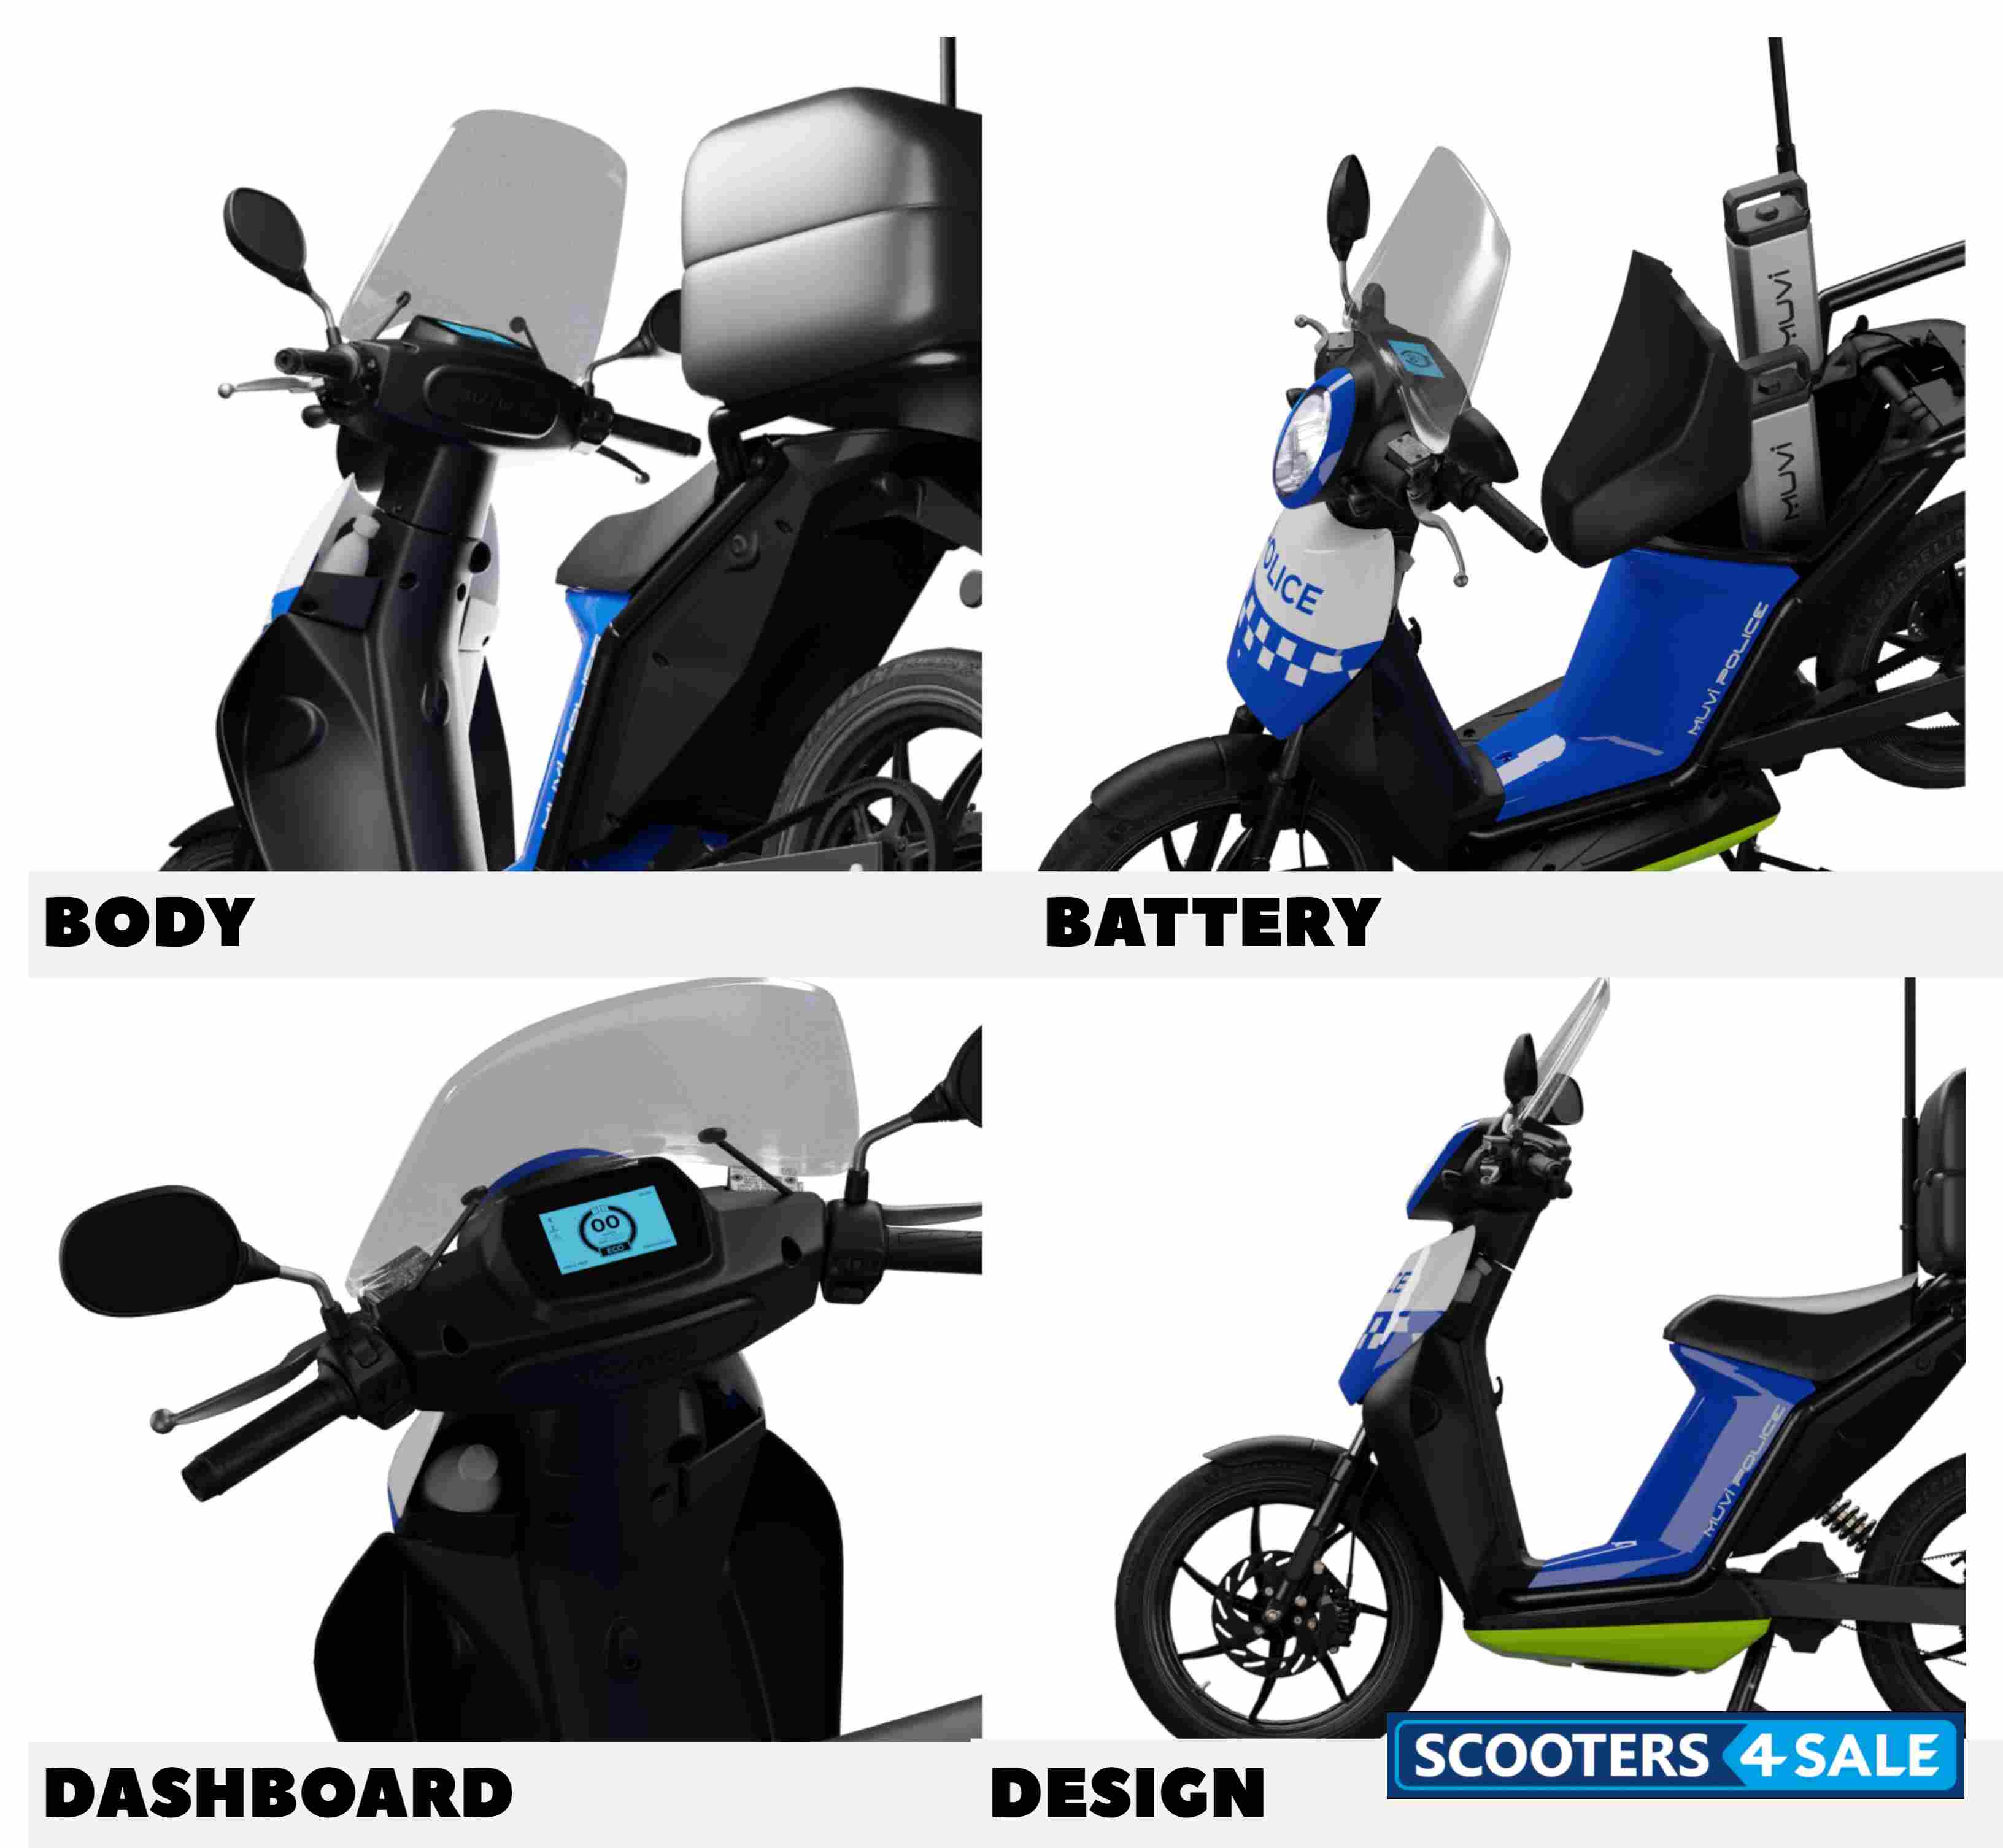 Ebikego Muvi Police Features